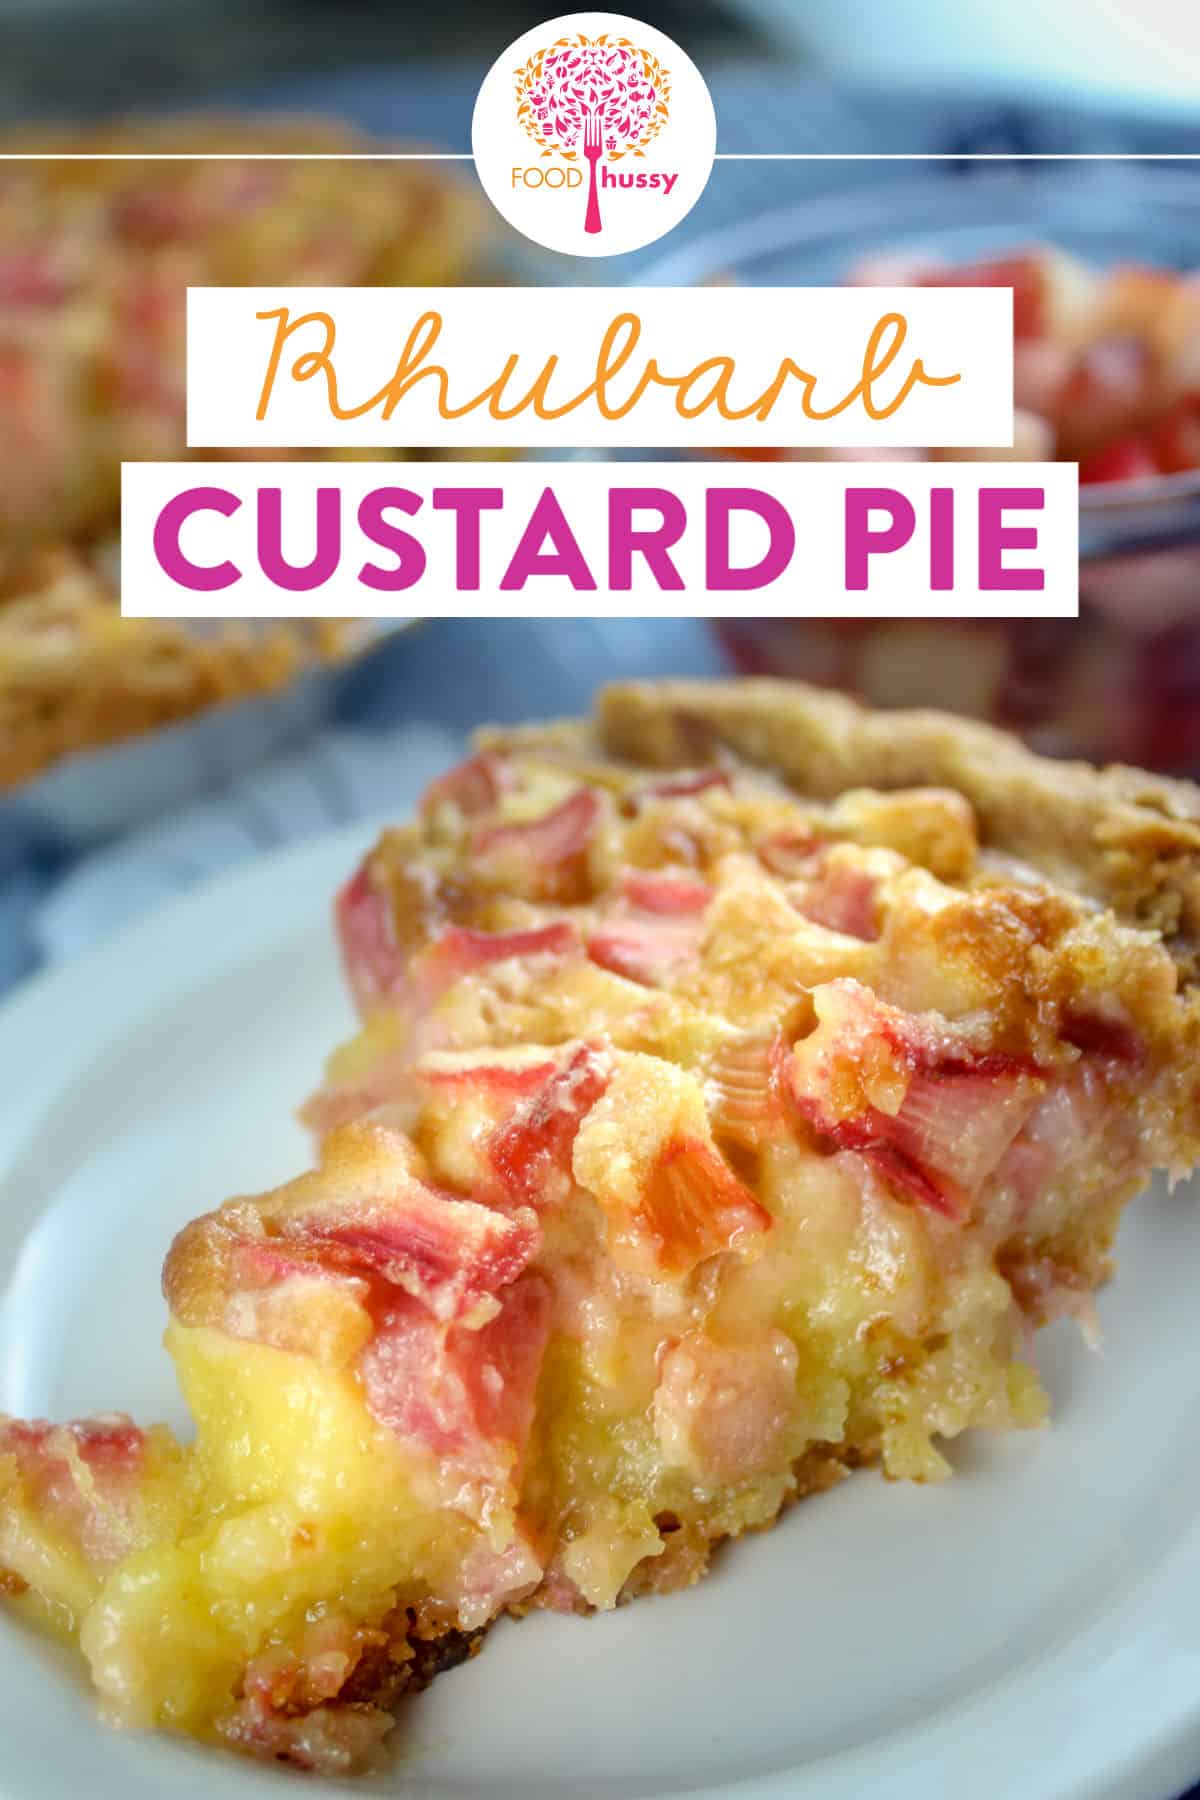 Rhubarb Custard Pie is my absolute favorite pie - the tart rhubarb mixed with lots of sugar and a creamy custard is just decadent! It is also a very special dessert recipe because my Dad made it every year for my birthday.  via @foodhussy